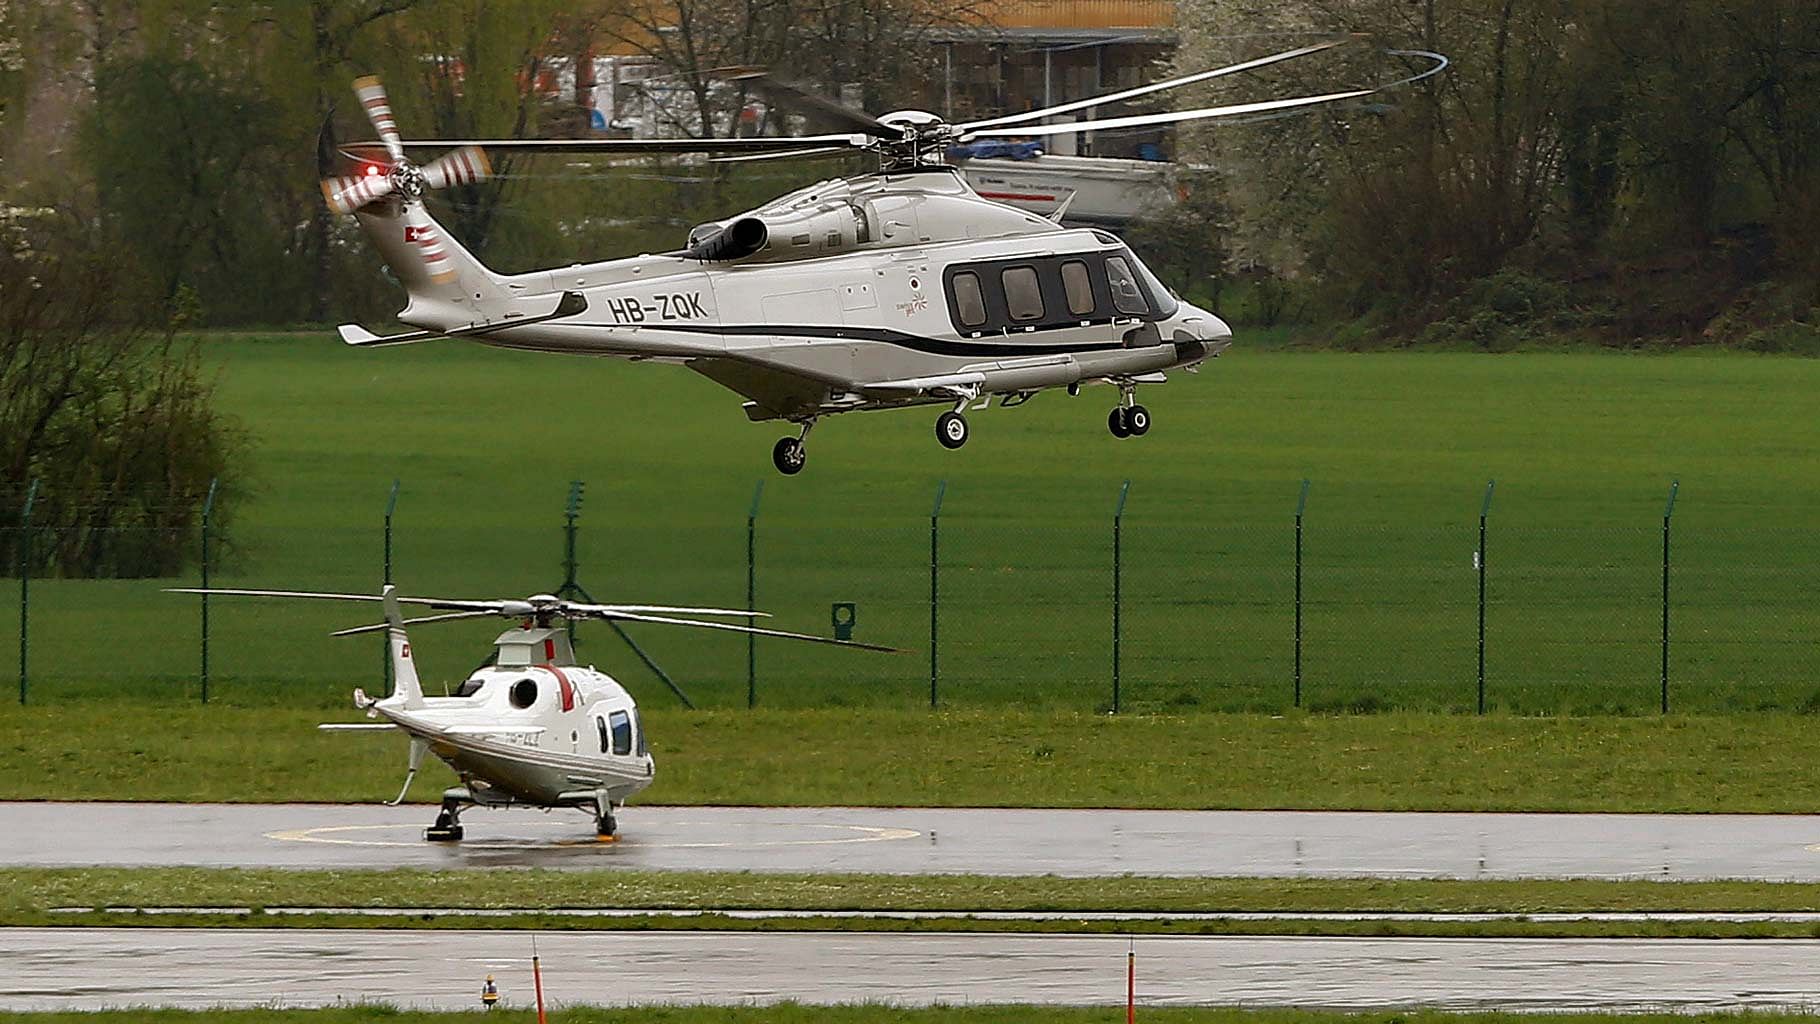 An AgustaWestland AW139 helicopter. Image used for representational purpose.